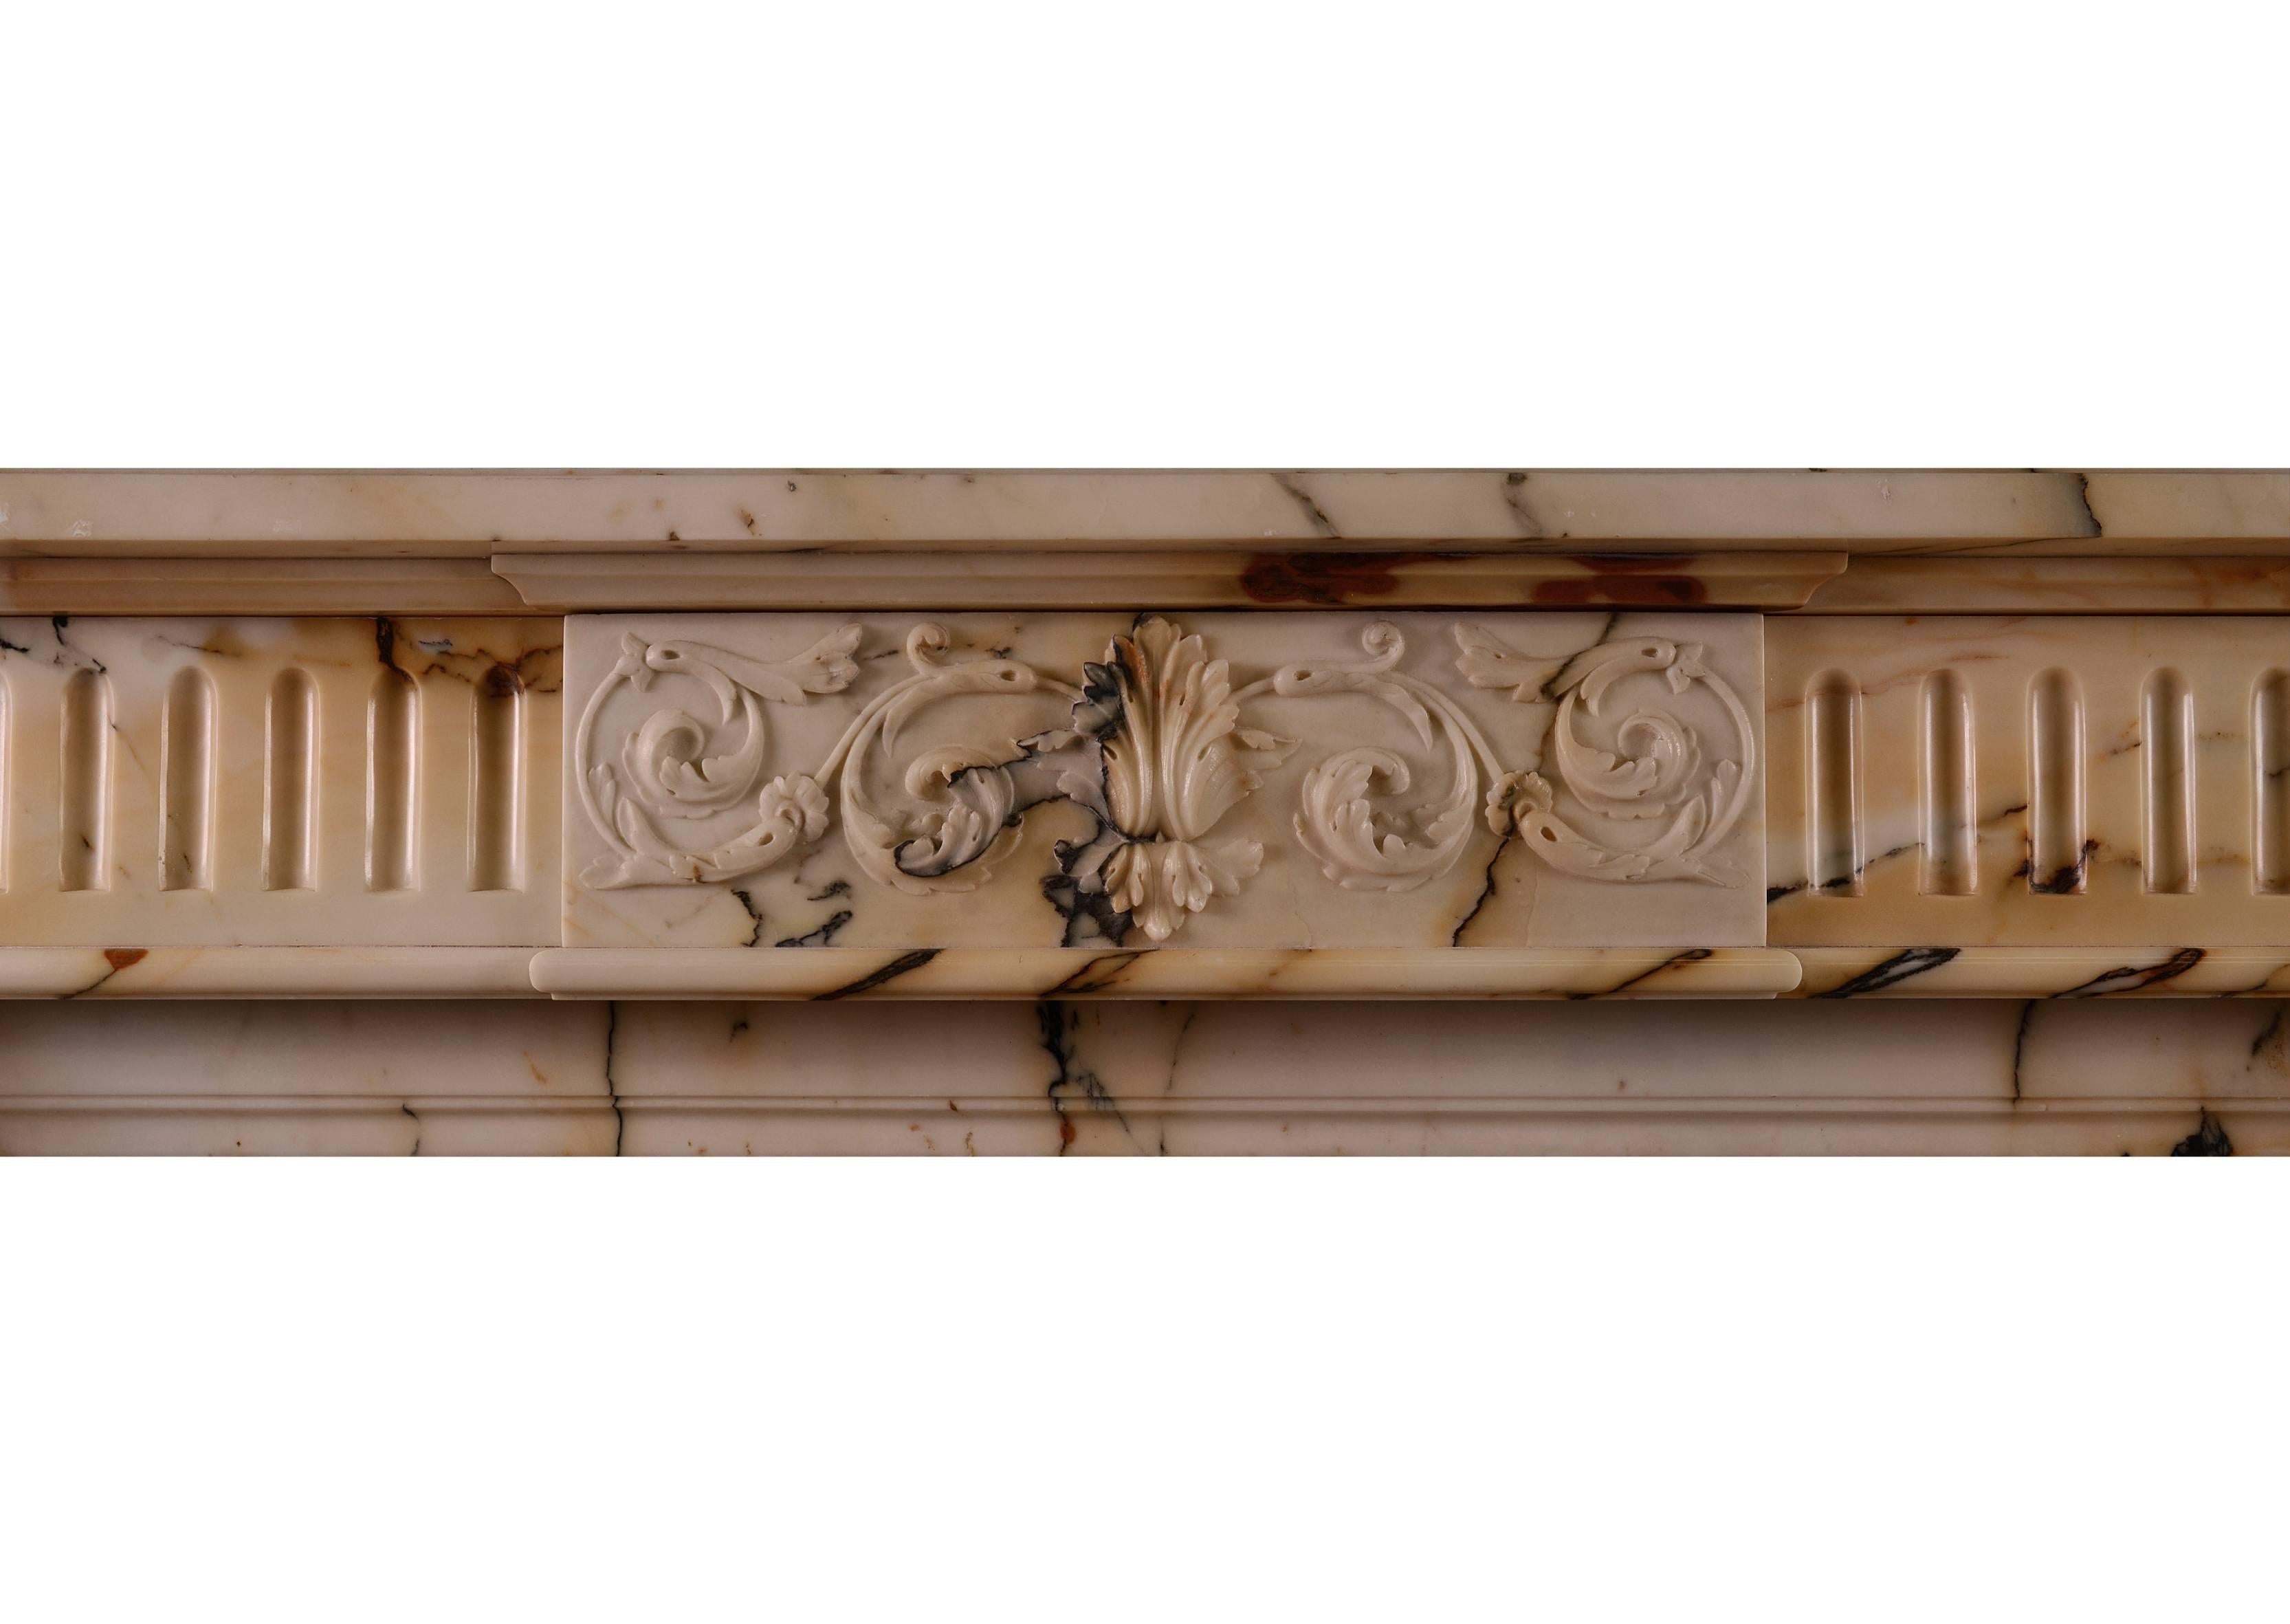 A good quality Louis XVI style antique fireplace in Italian Pavonazzo marble. The stop fluted jambs surmounted by carved panels with flowers and tied ribbons. The frieze carved centre panel with scrolled foliage and cartouche to middle, flanked by